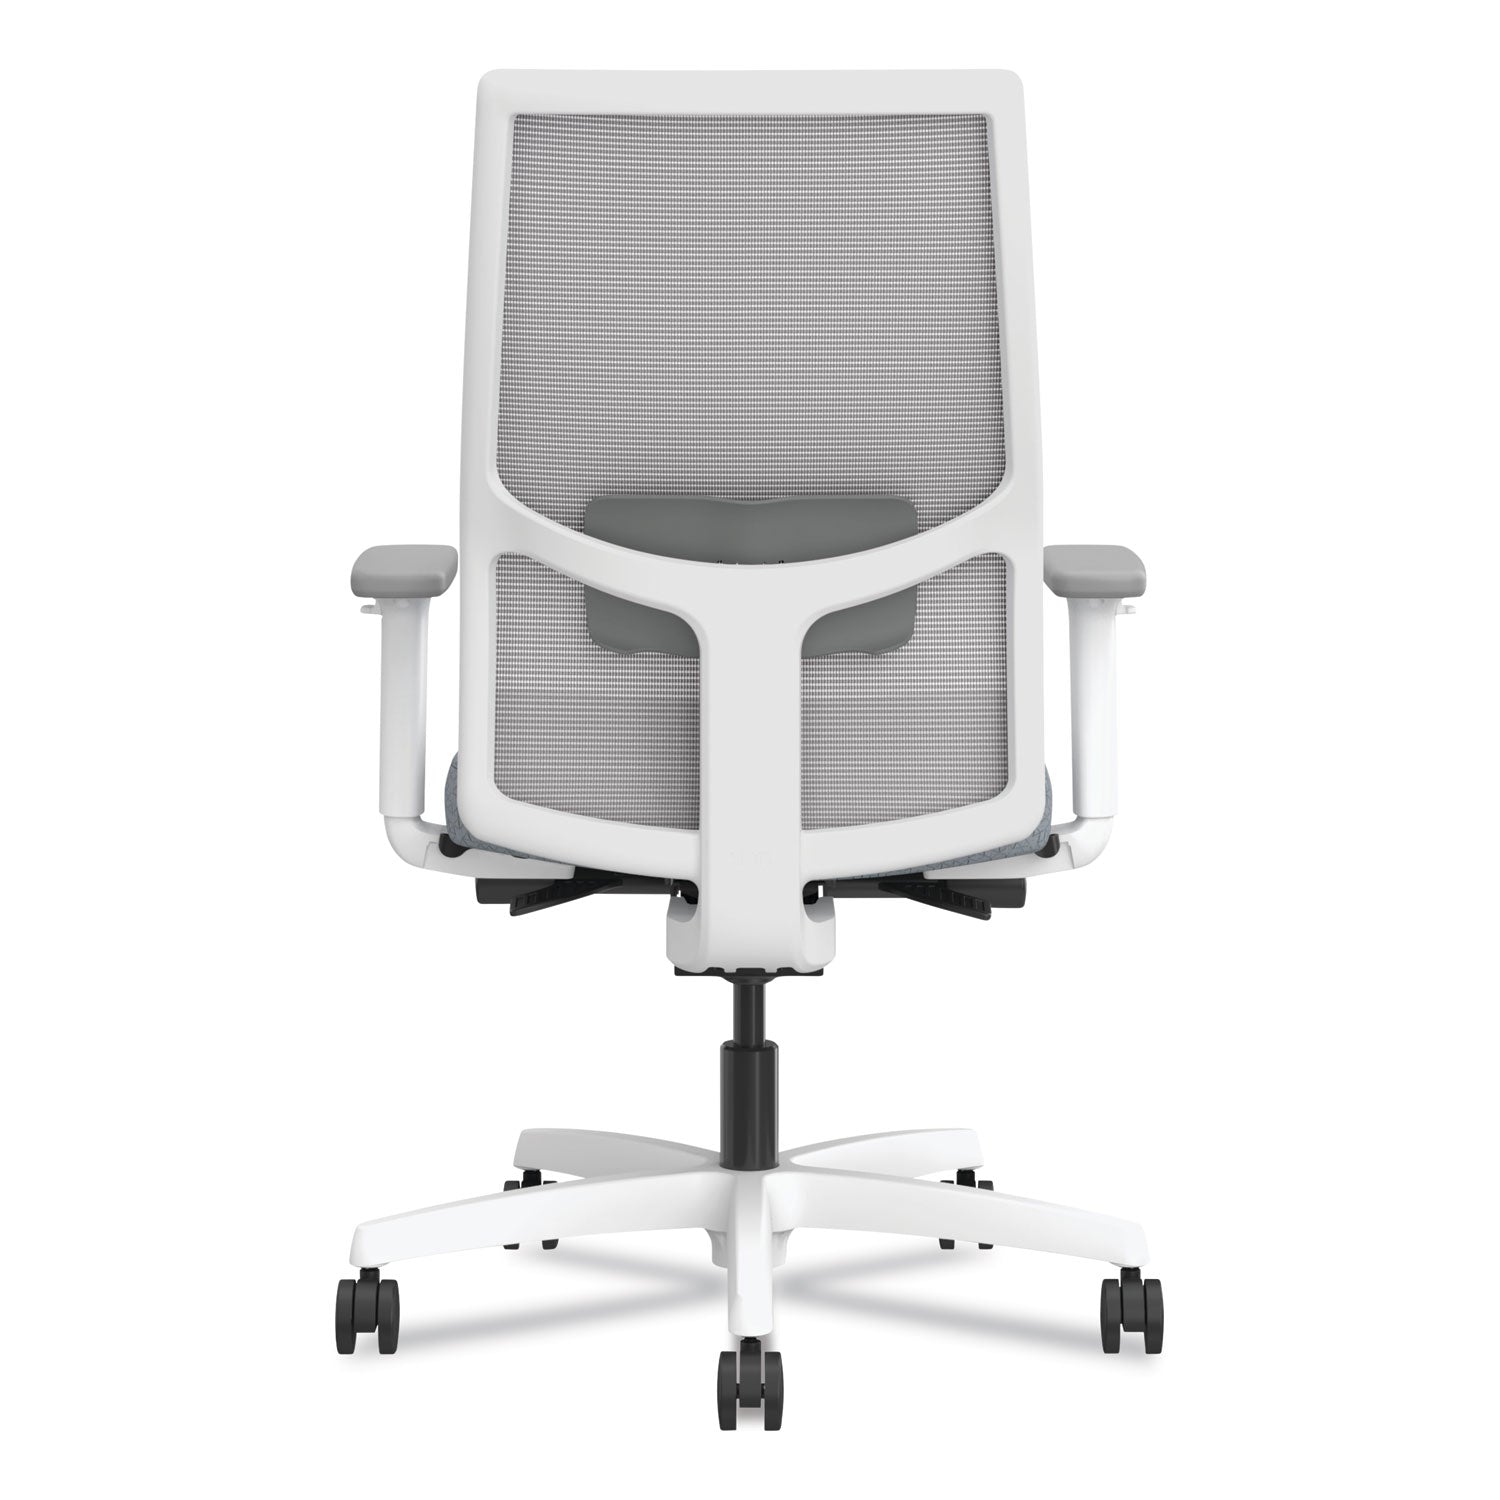 ignition-20-4-way-stretch-mid-back-mesh-task-chair-gray-adjustable-lumbar-support-basalt-fog-white-ships-in-7-10-bus-days_honi2mm2afa25tx - 2